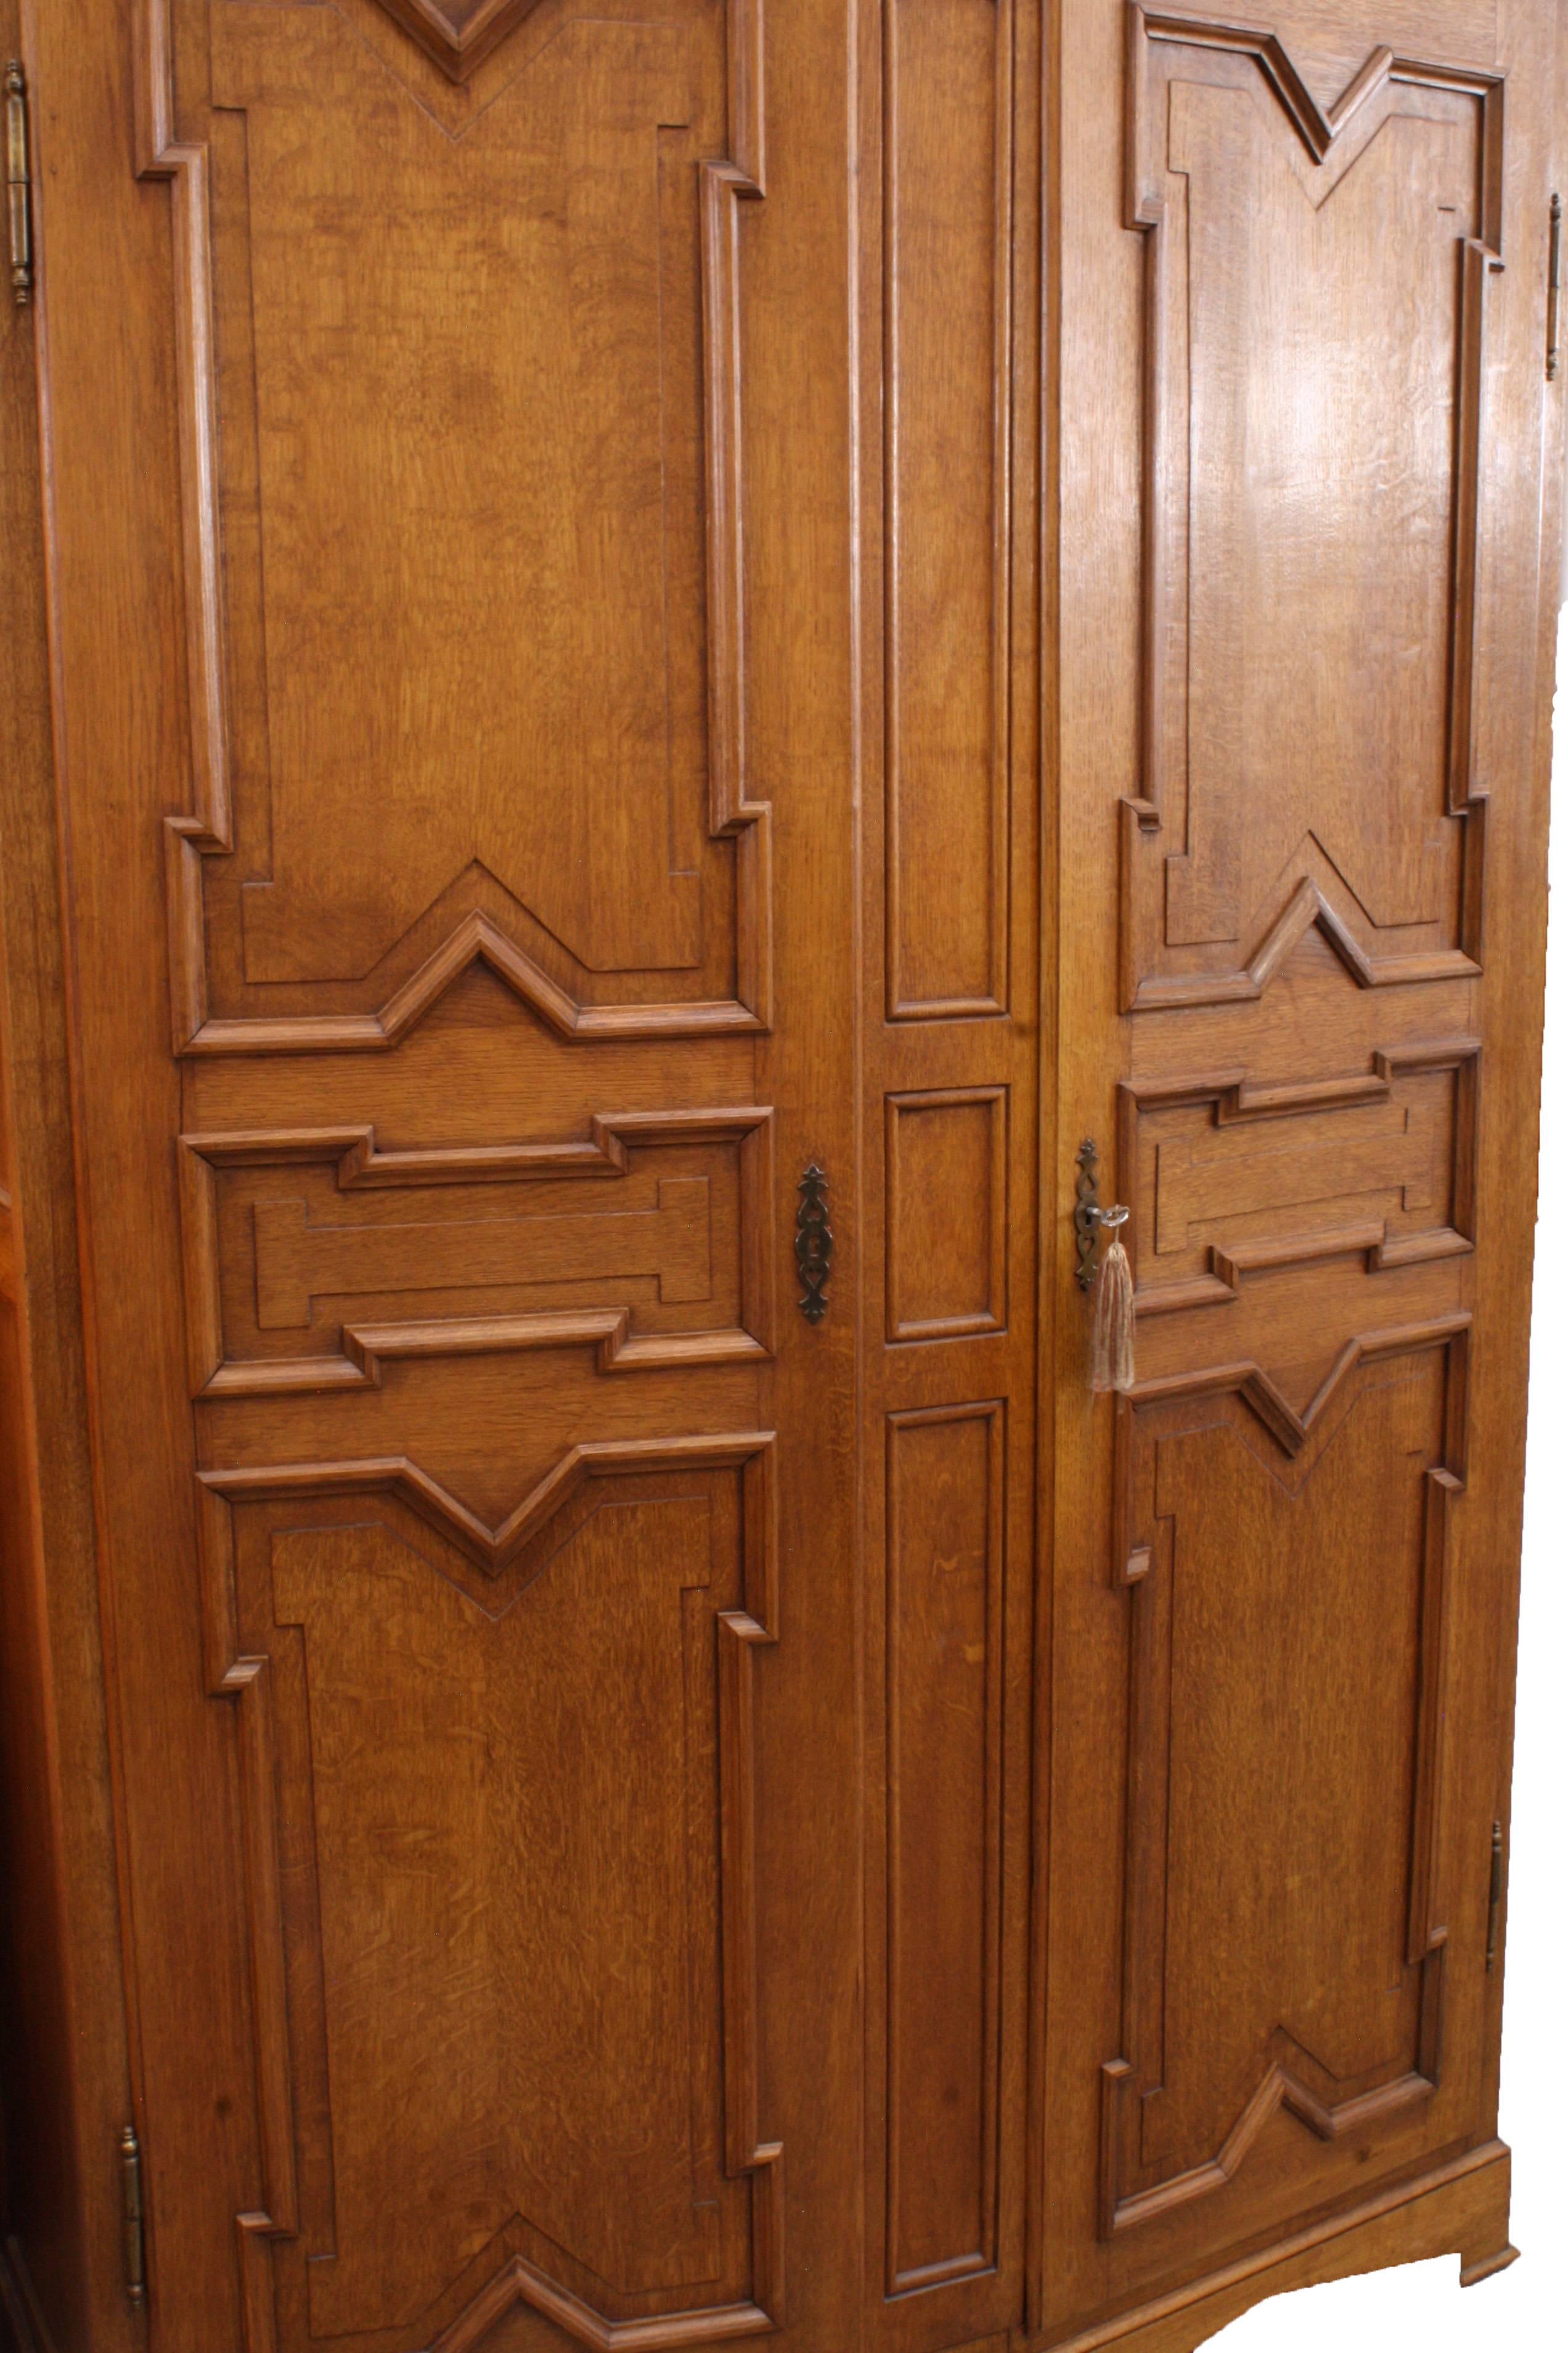 The quarter sawn oak of this simplistic Neo Gothic style armoire, was meticulously picked to match the unique patterns in the wood grain.  Two heavy doors open to reveal dressing mirrors on the inside of both doors and the piece has plenty of rods